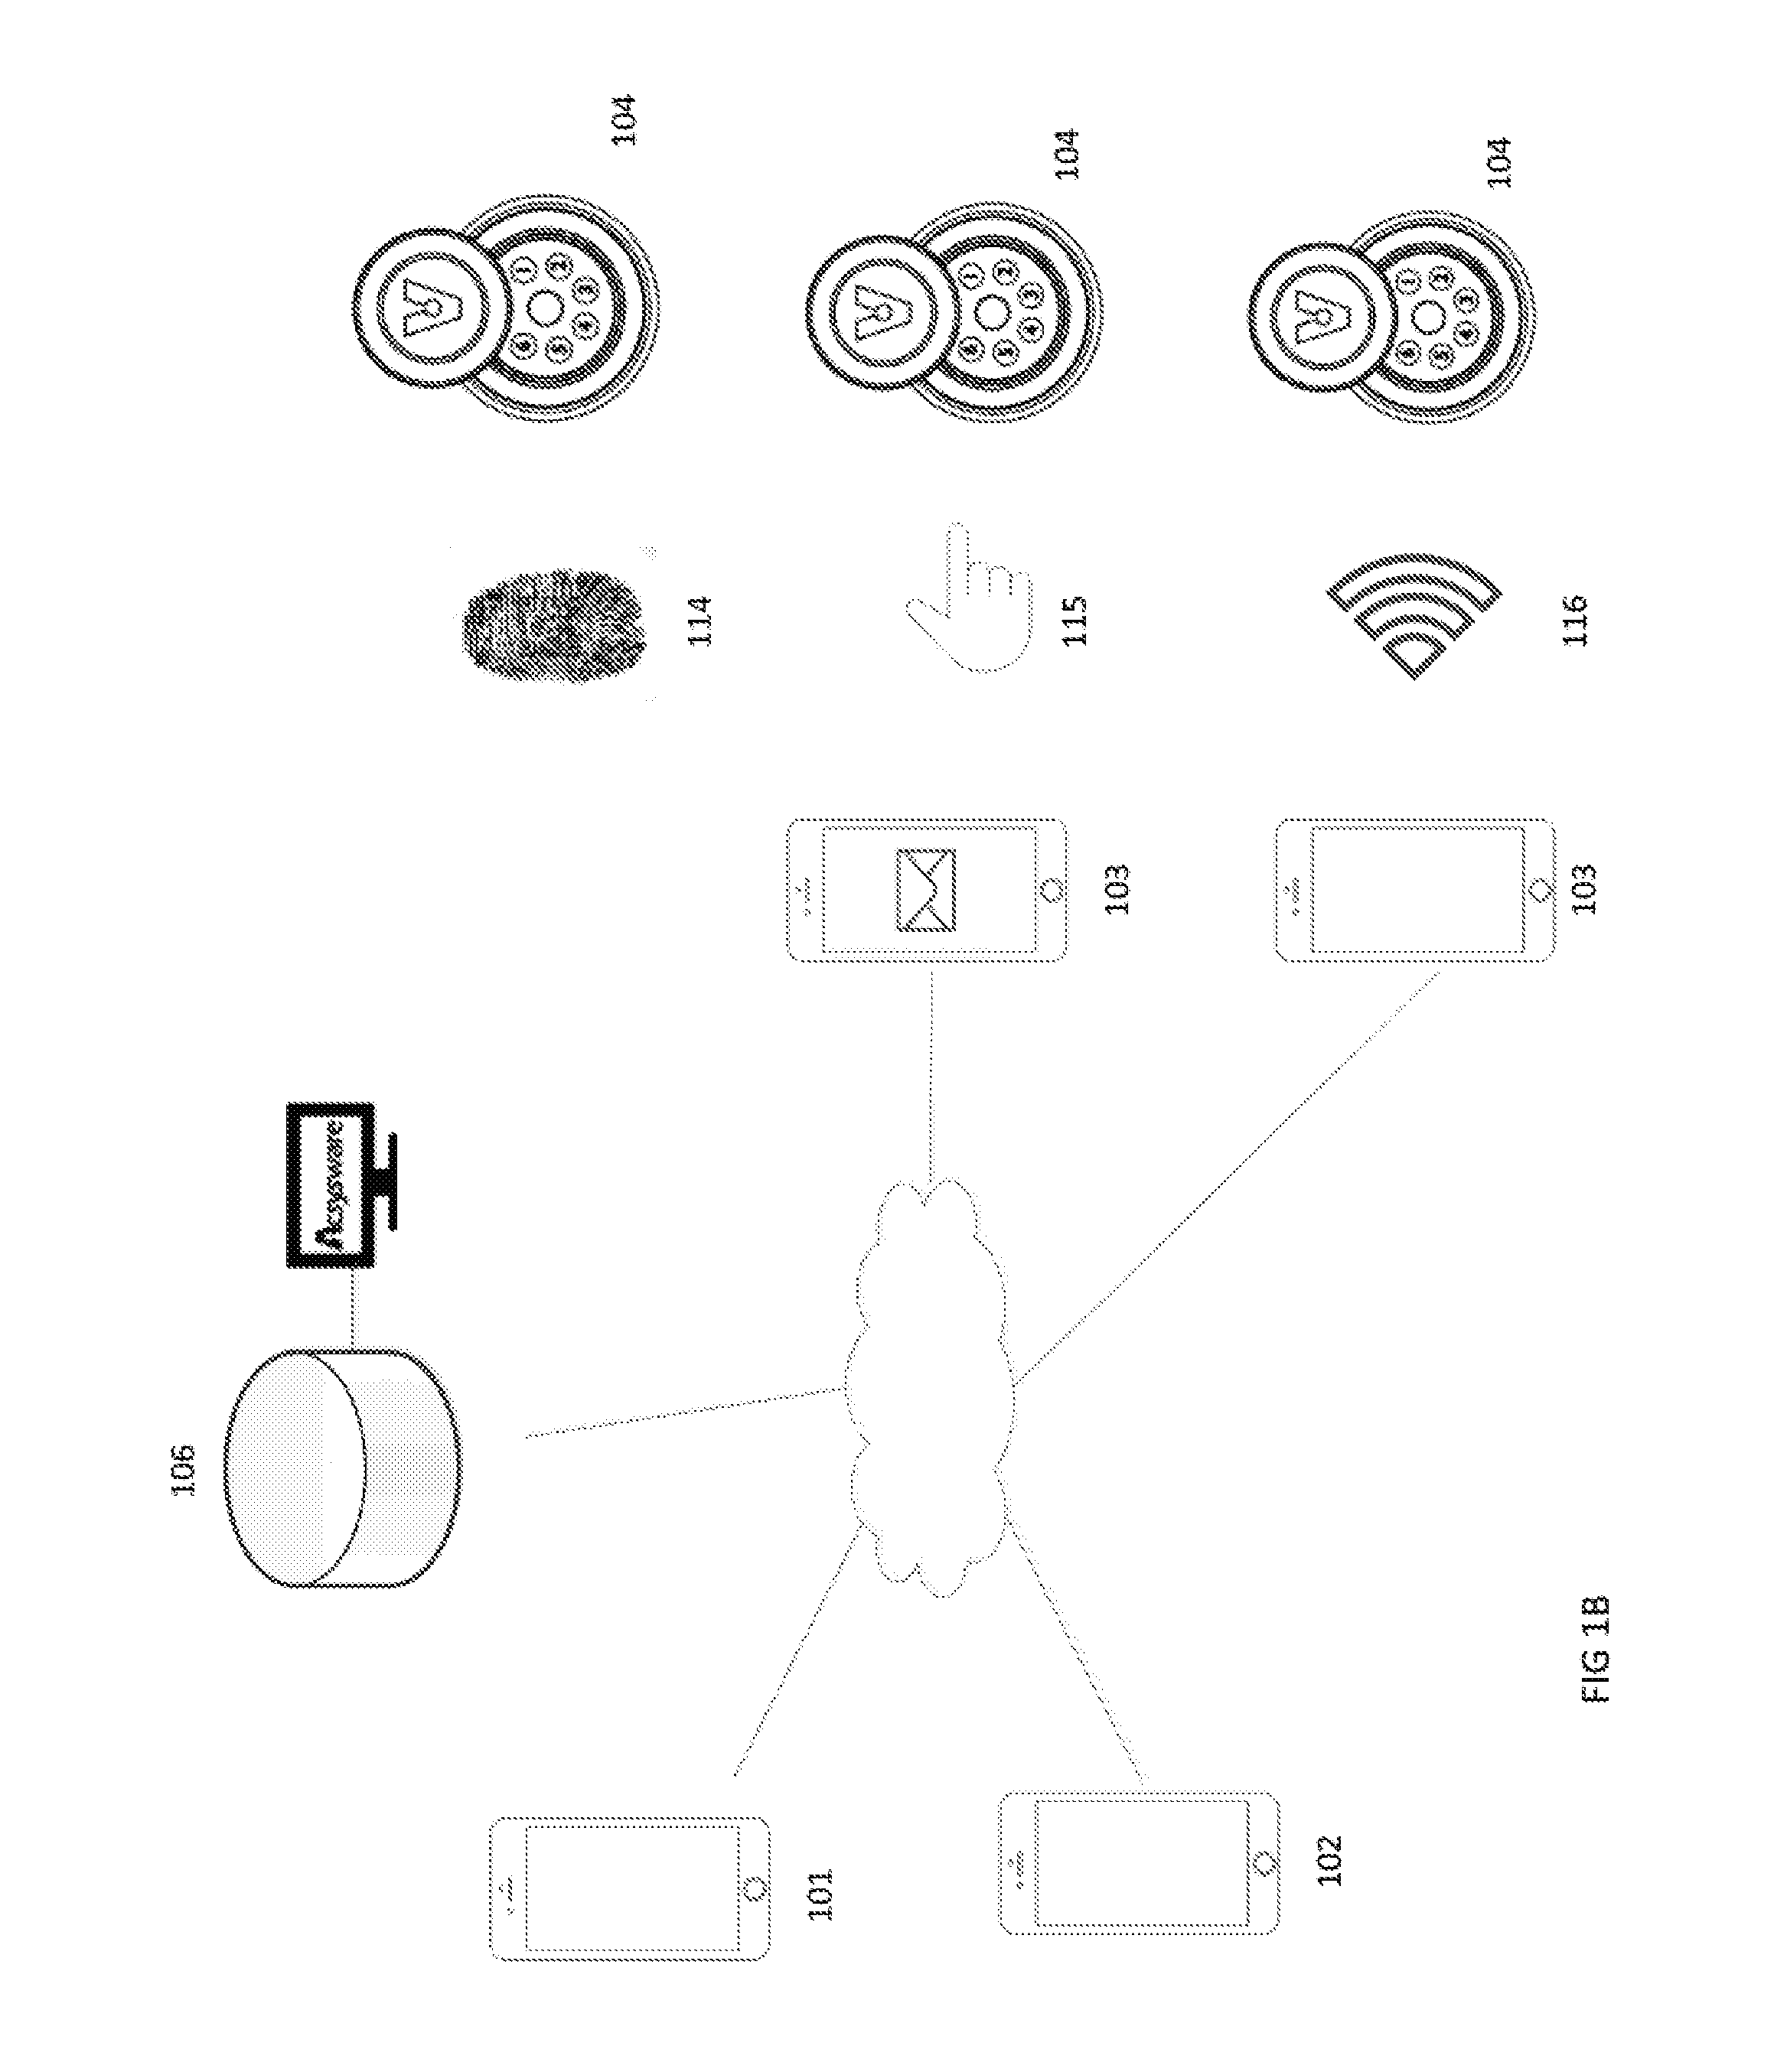 Systems and methods for redundant access control systems based on mobile devices and removable wireless buttons